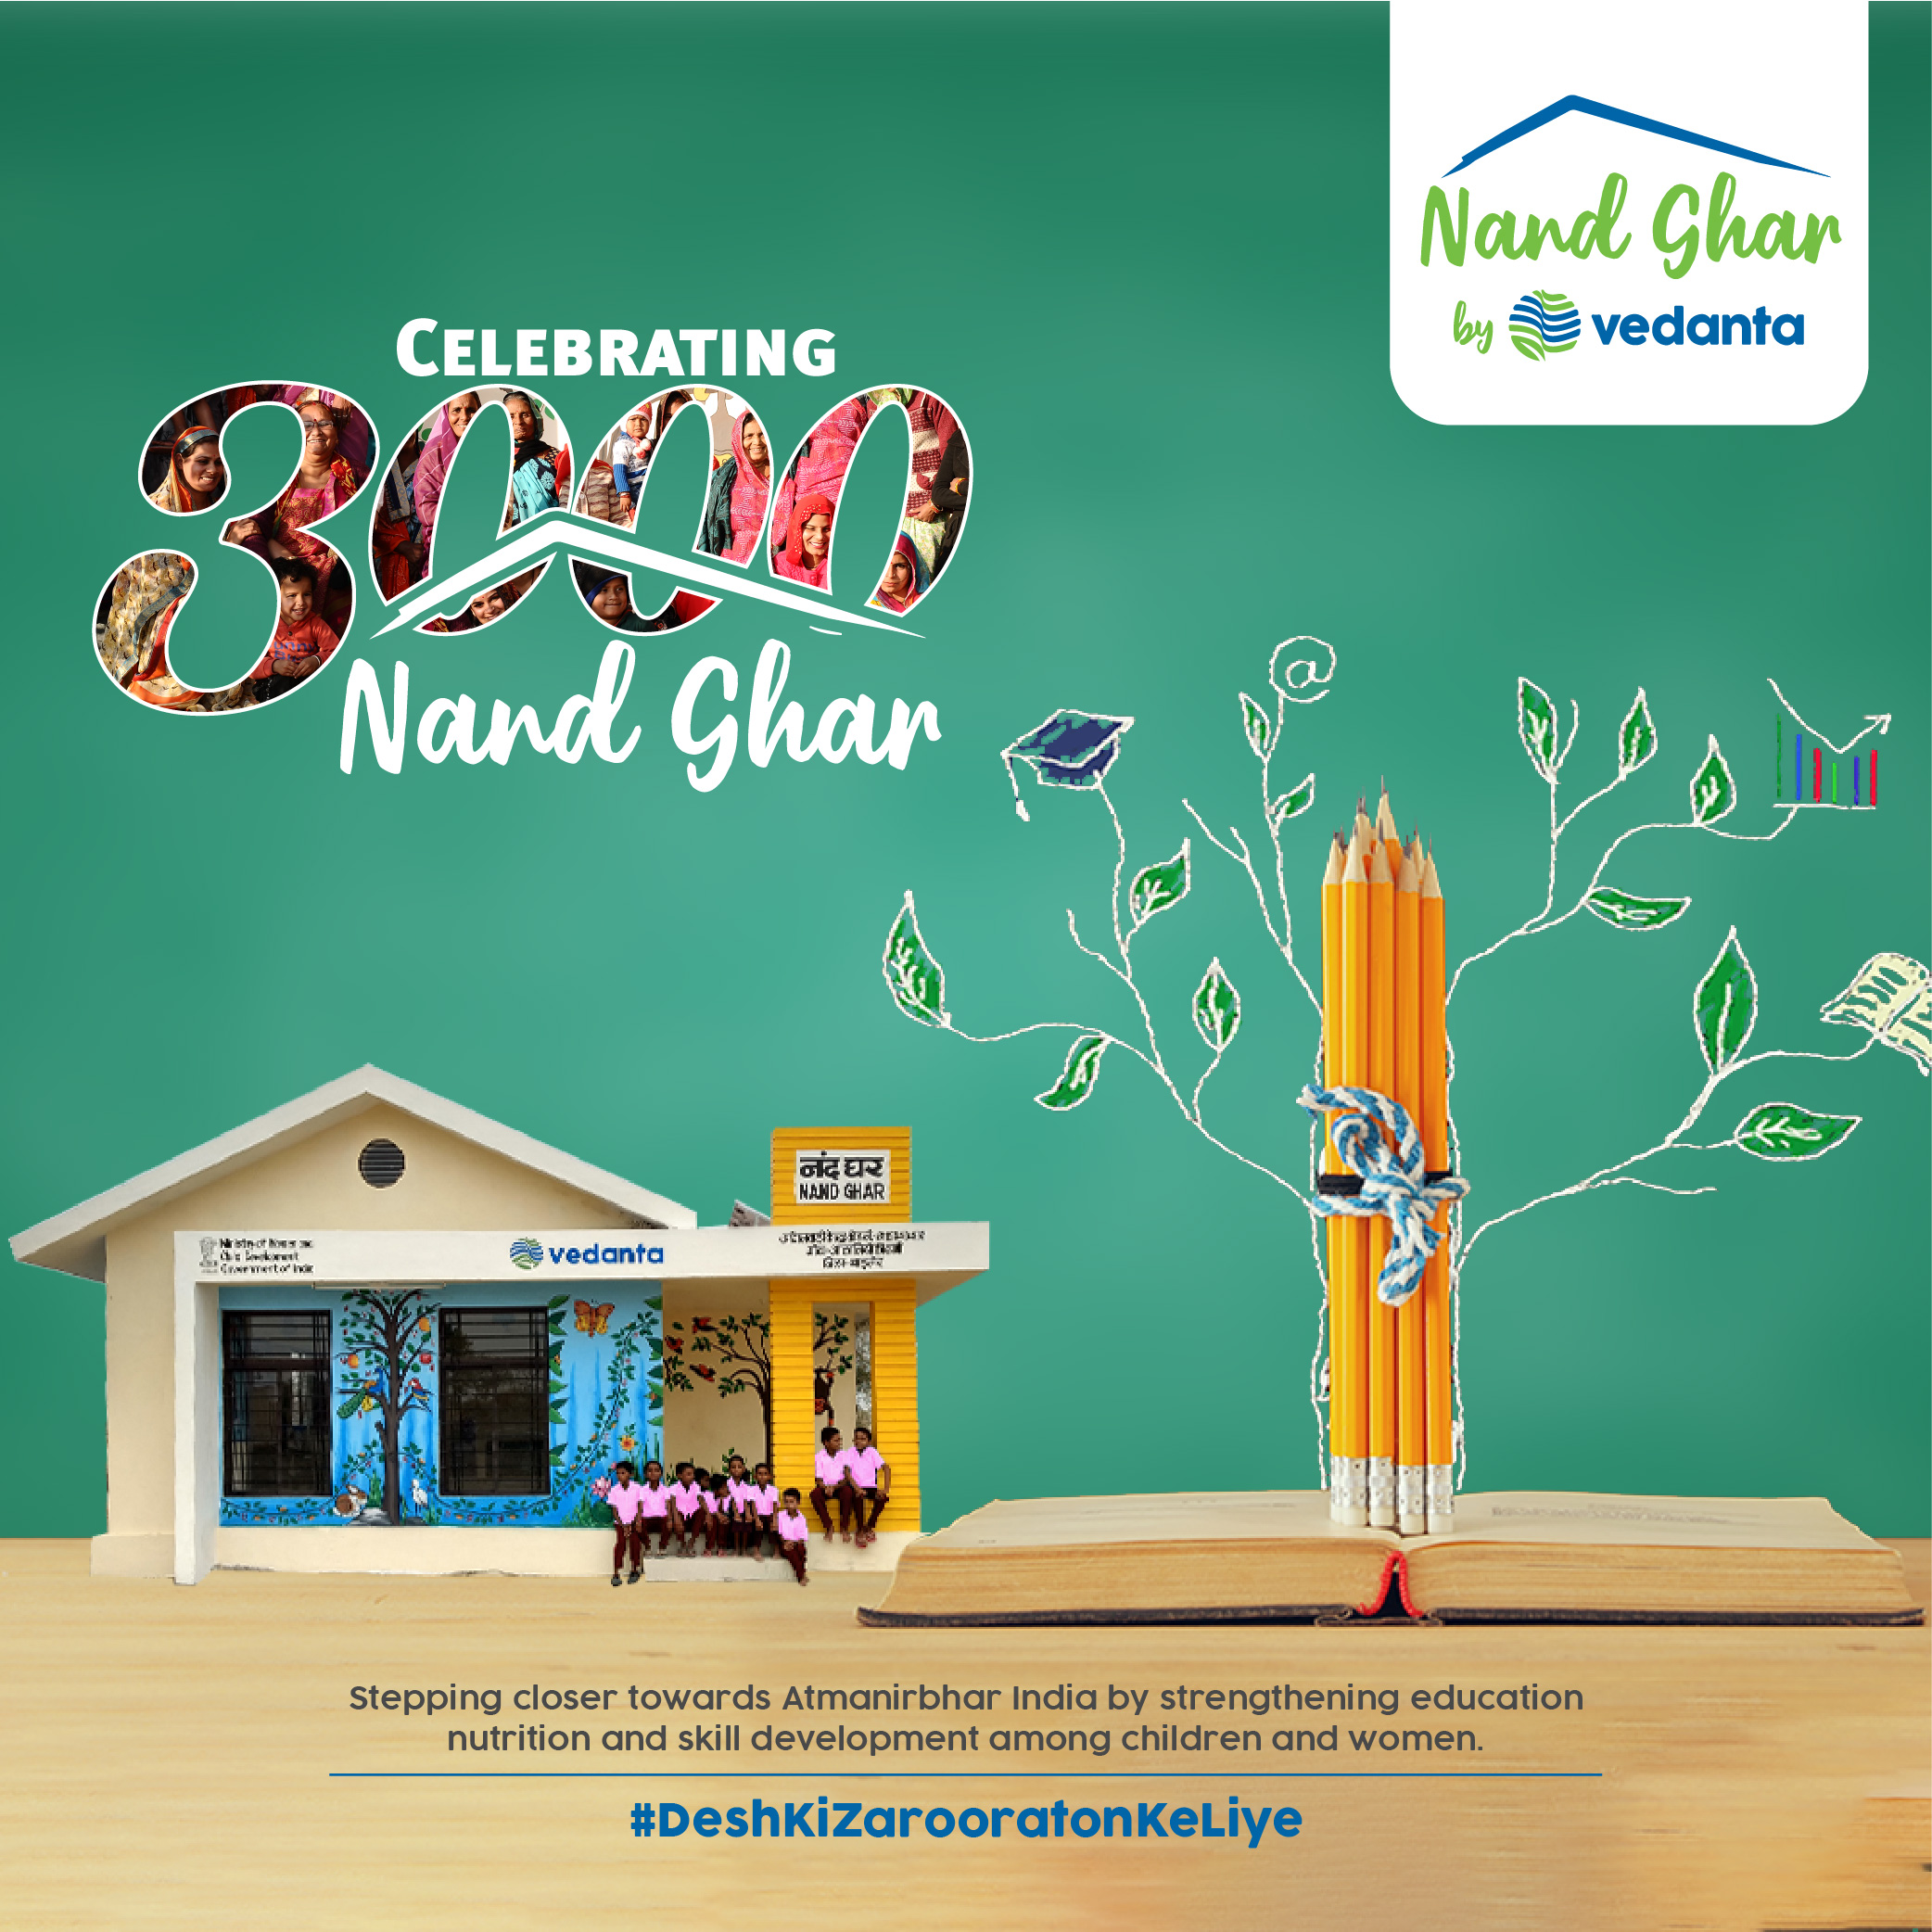 Vedanta Chairman’s dream project Nand Ghar achieves a significant milestone, the 3000 Mark!